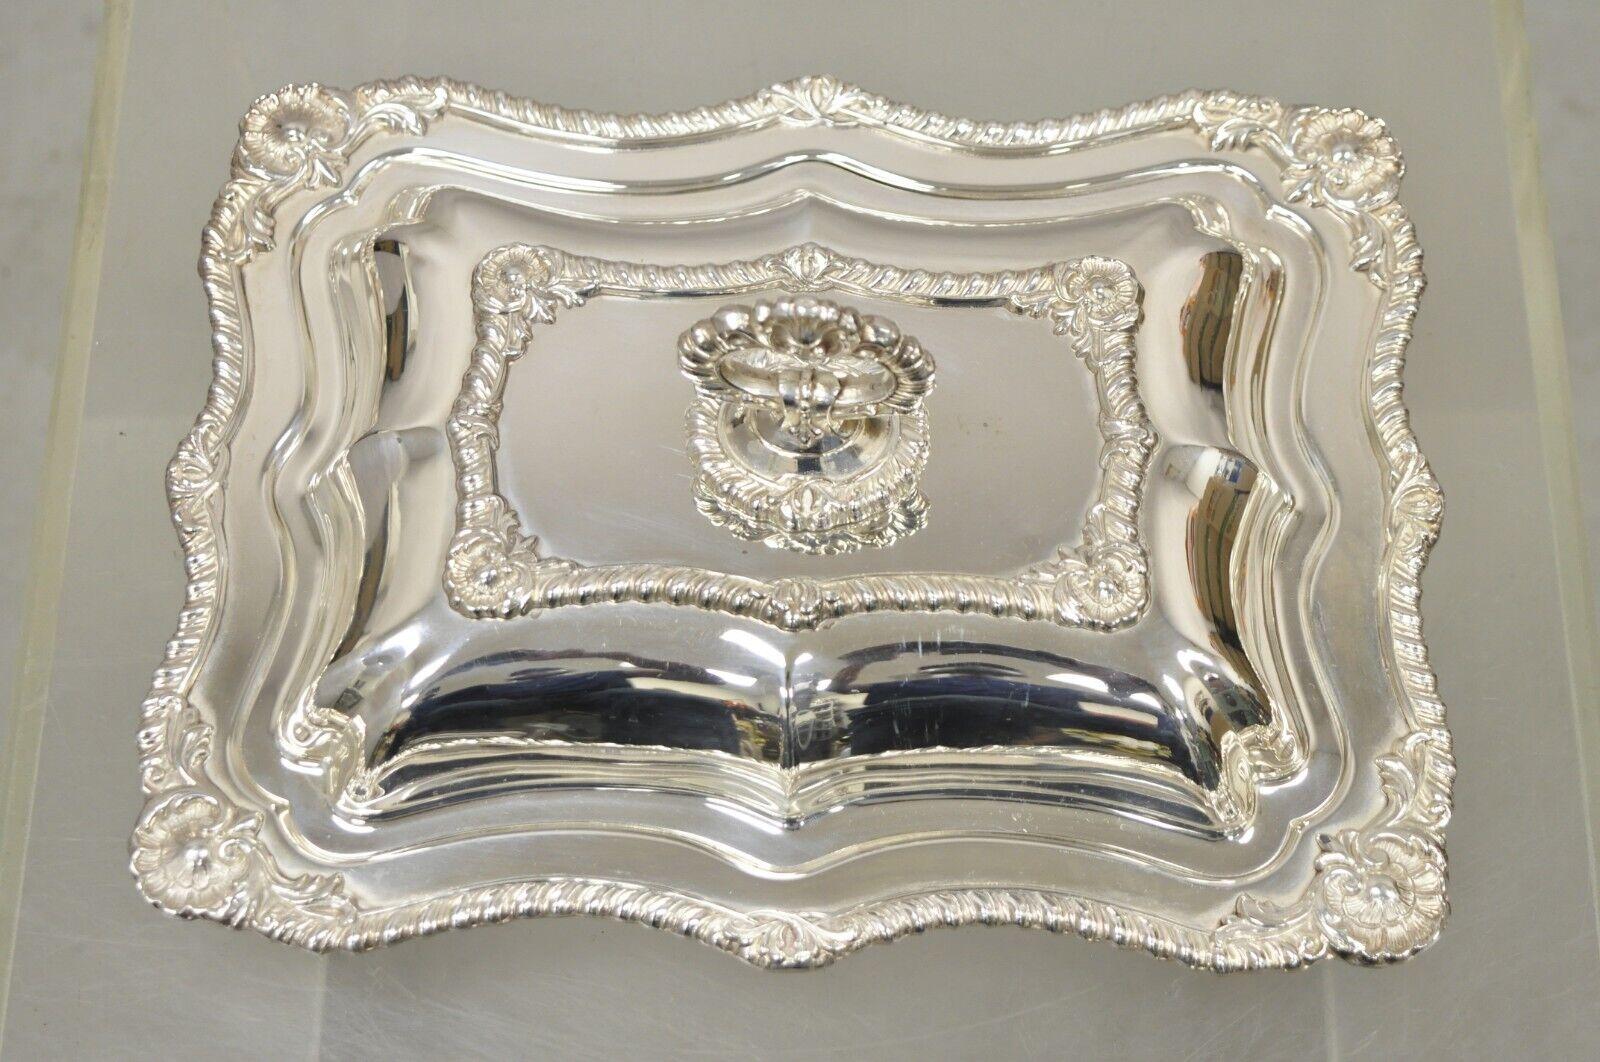 Silver Plated Victorian Scalloped Edge Lidded Vegetable Serving Platter Dish In Good Condition For Sale In Philadelphia, PA